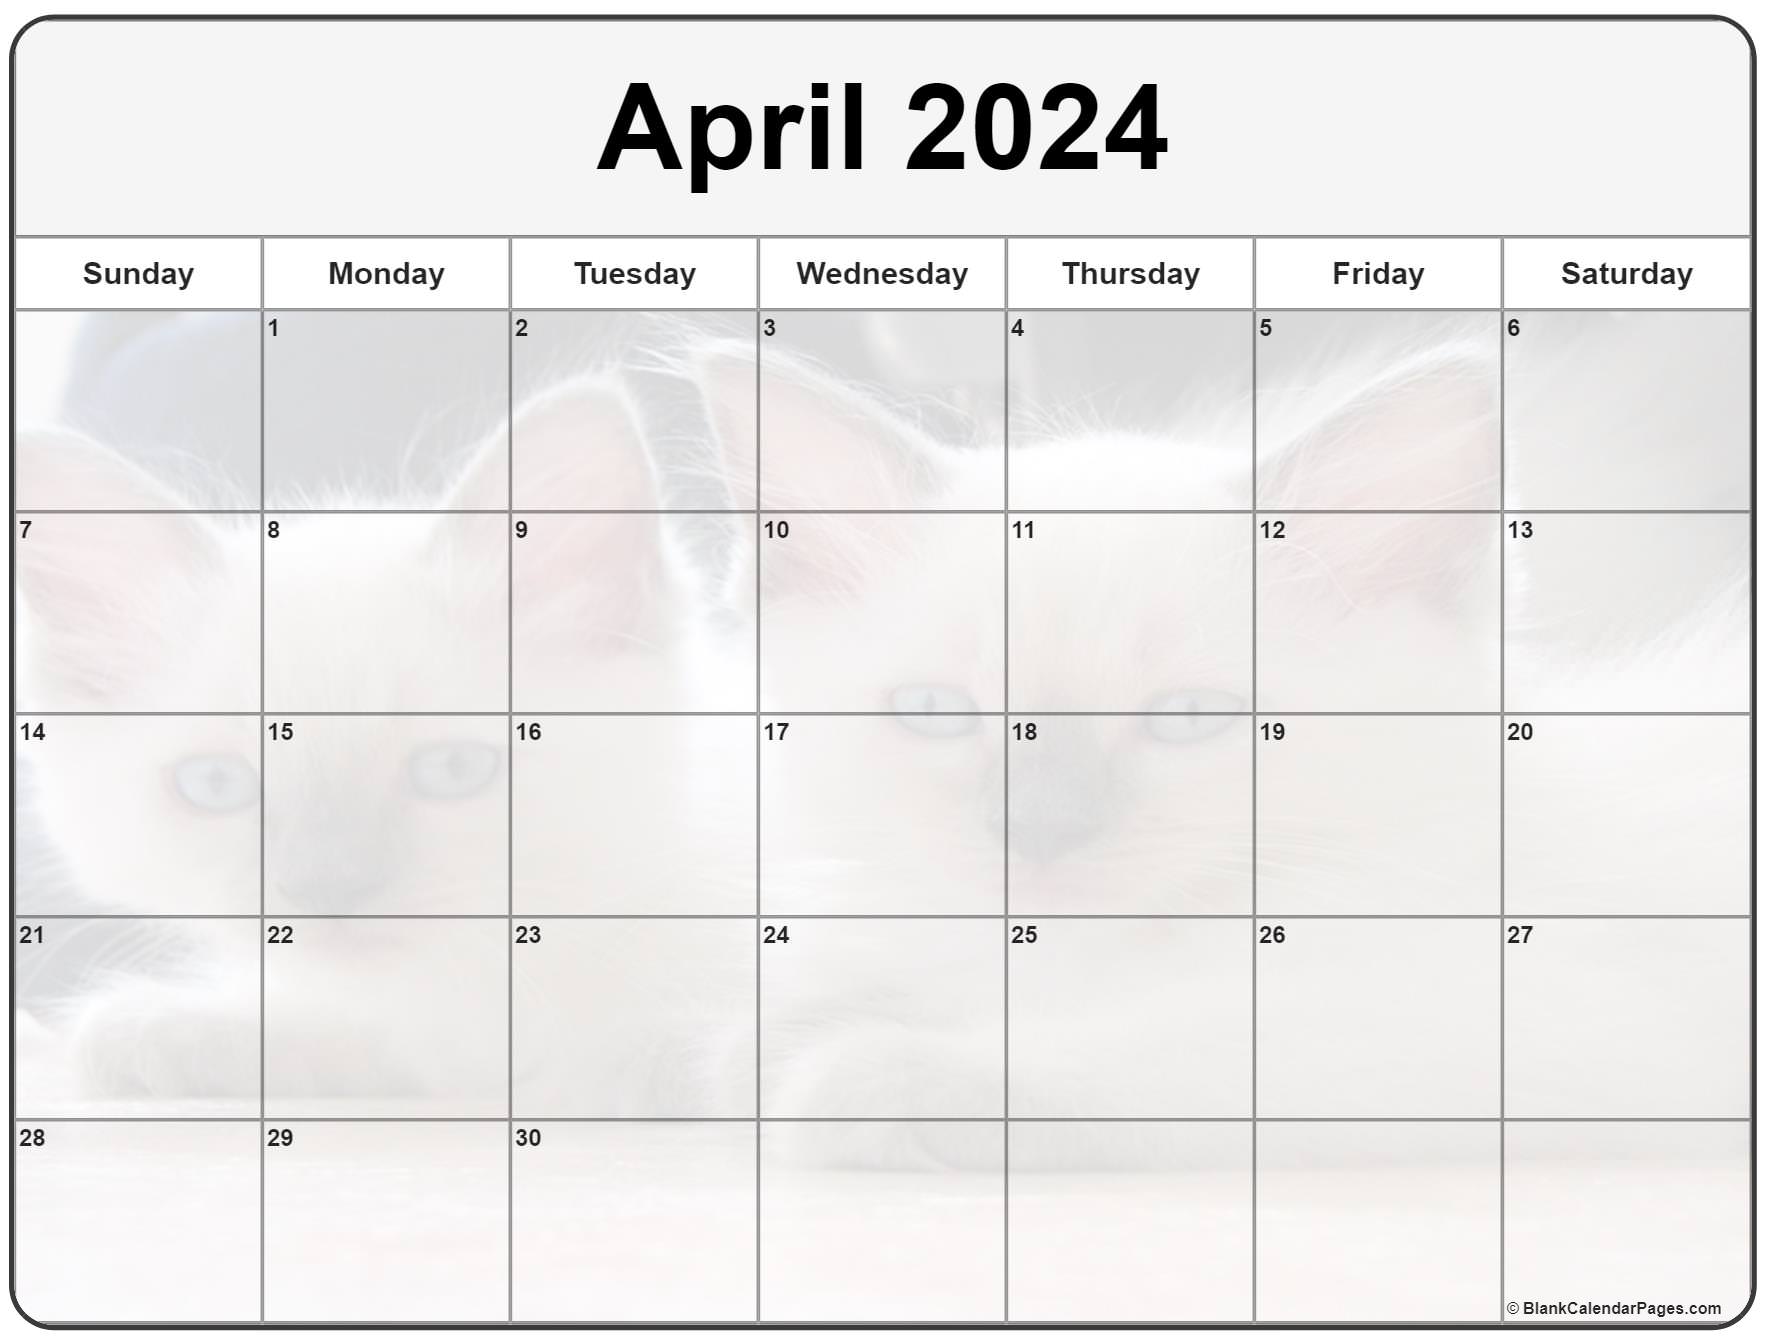 Collection of April 2023 photo calendars with image filters.